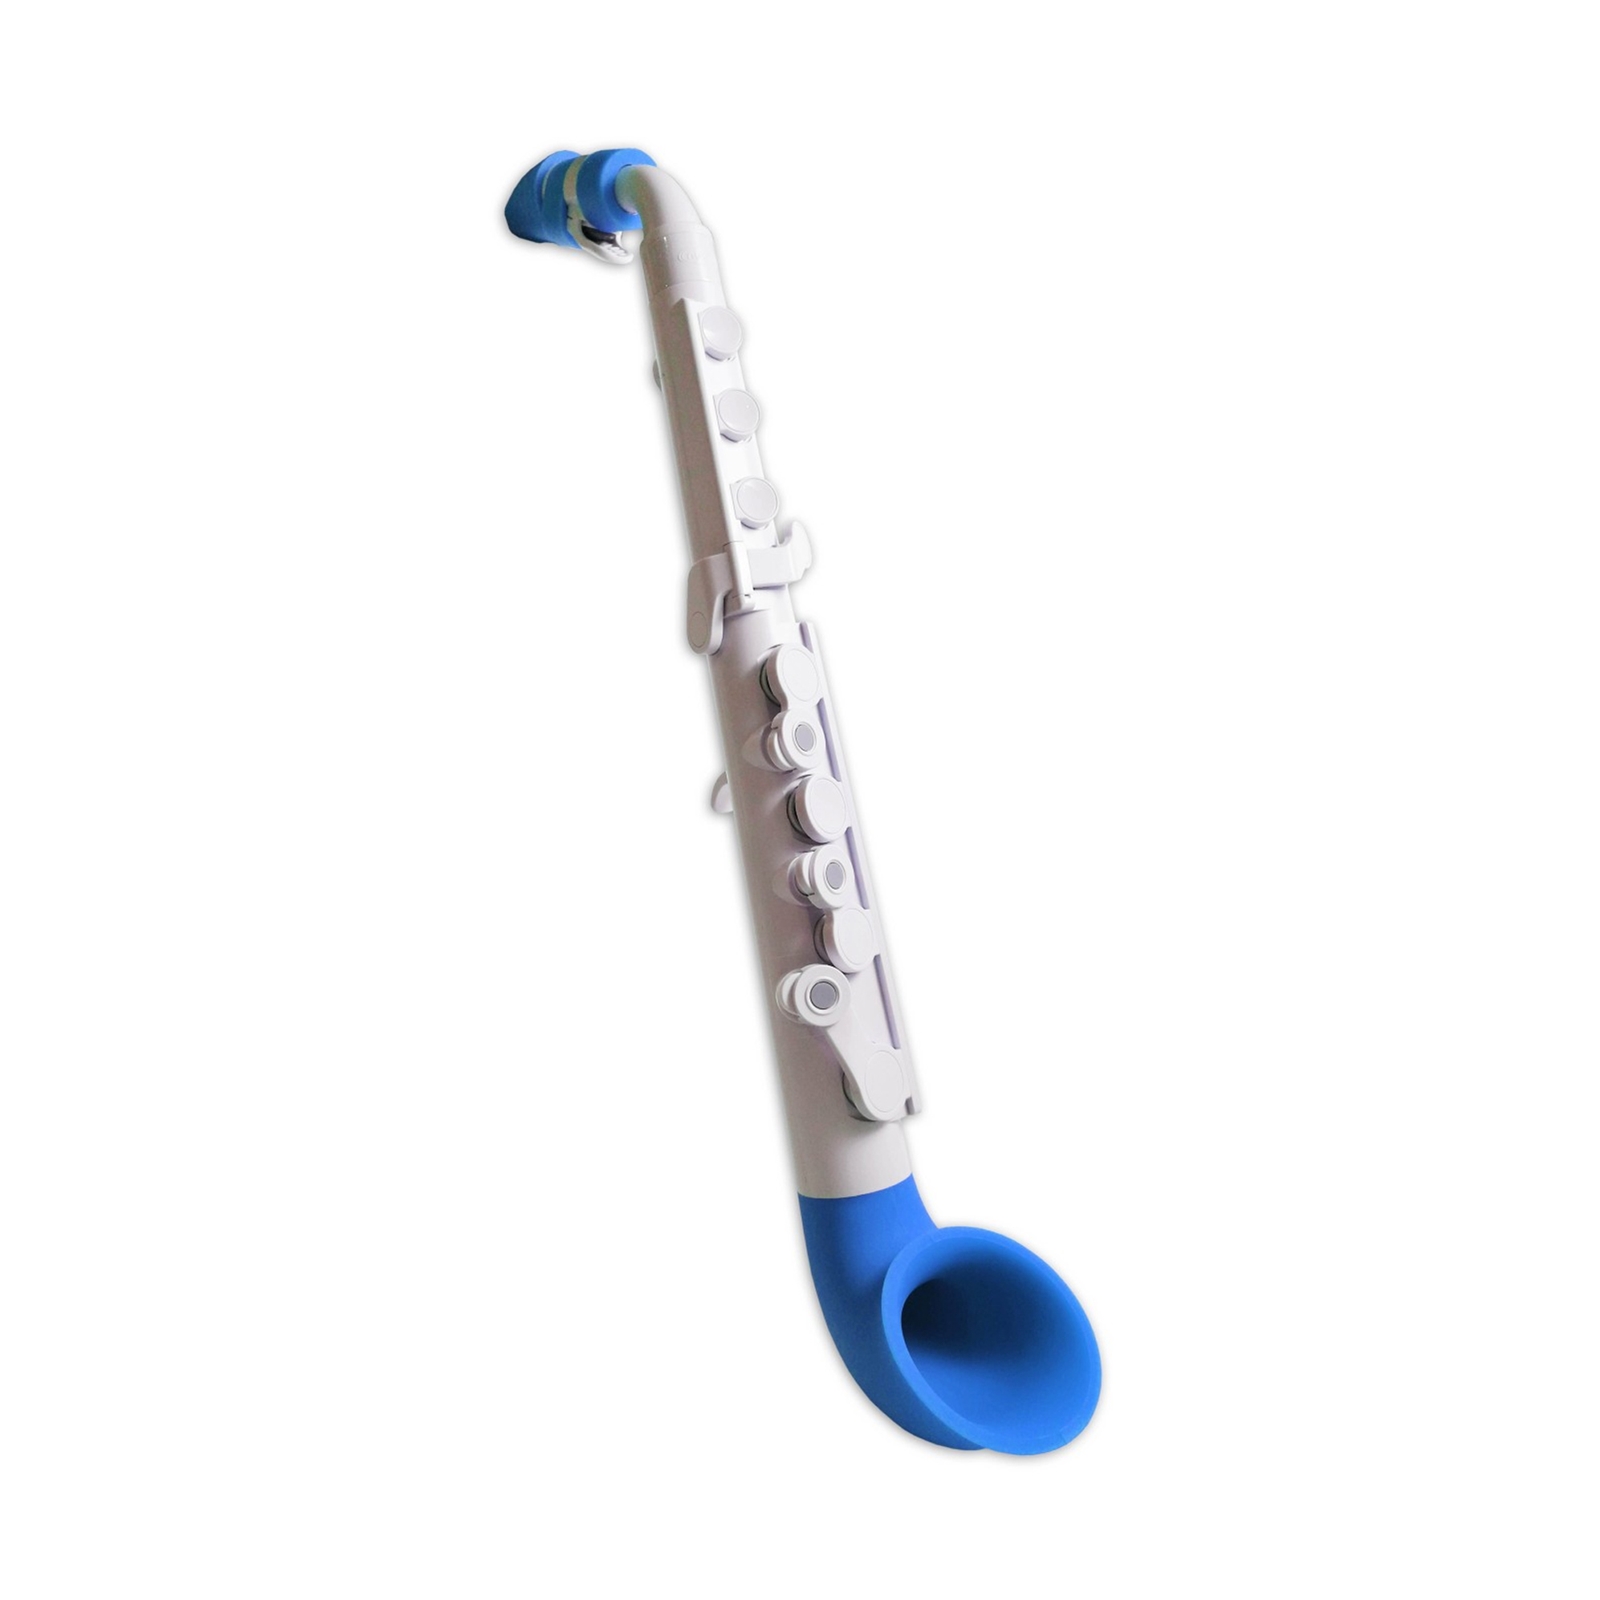 Nuvo jSax Childrens Colored Training Sax-Like Instrument